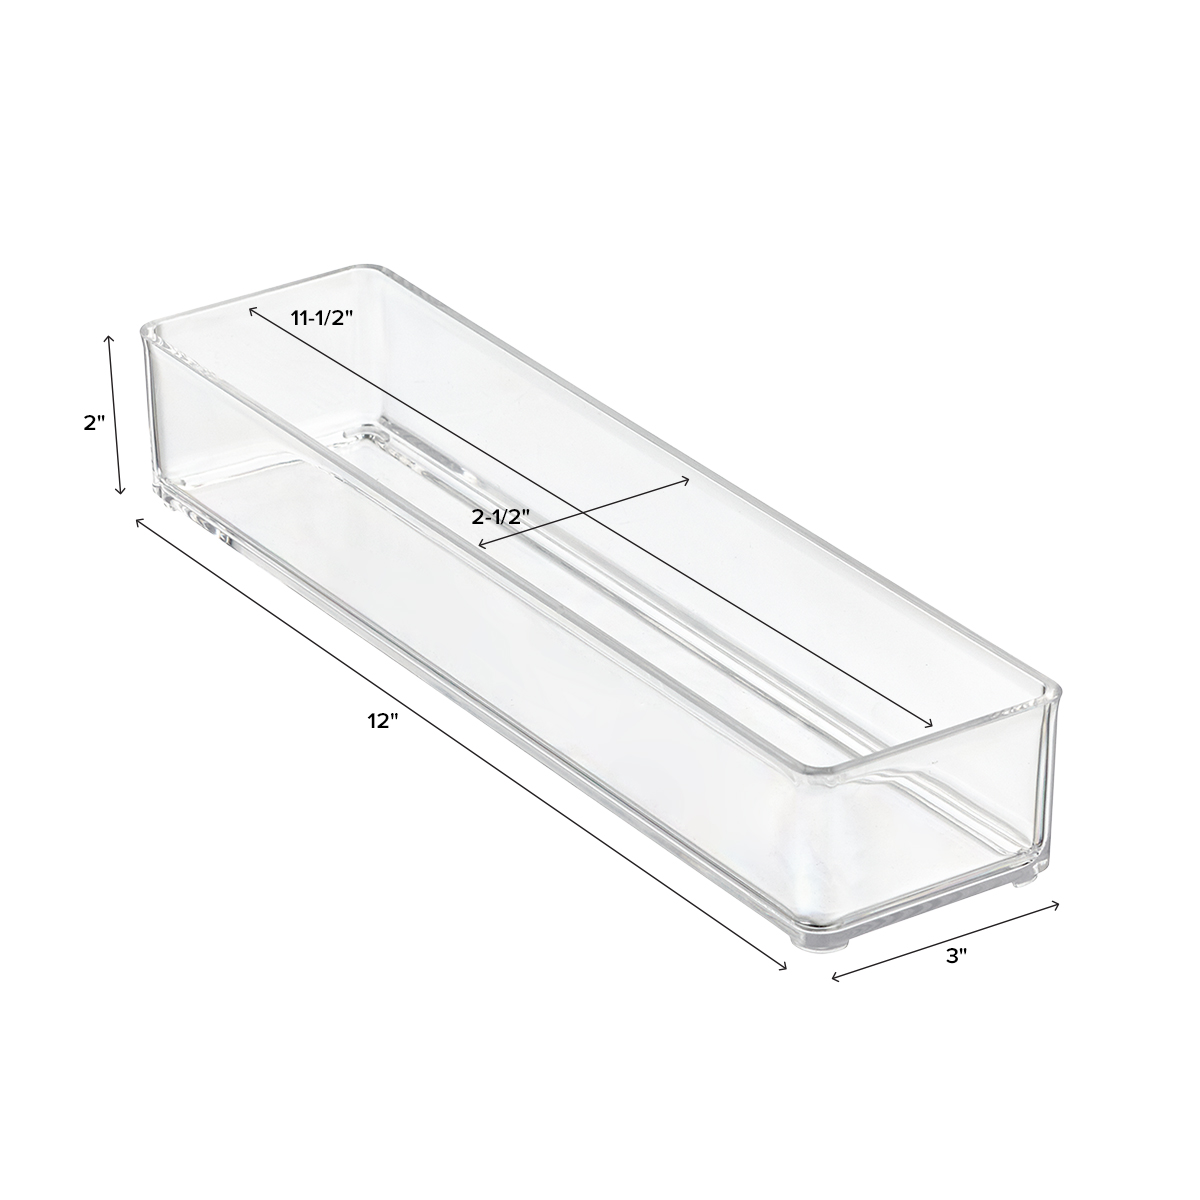 Medium Stackable Organizer Tray Translucent, 6-3/8 x 9-1/2 x 2-3/4 H | The Container Store